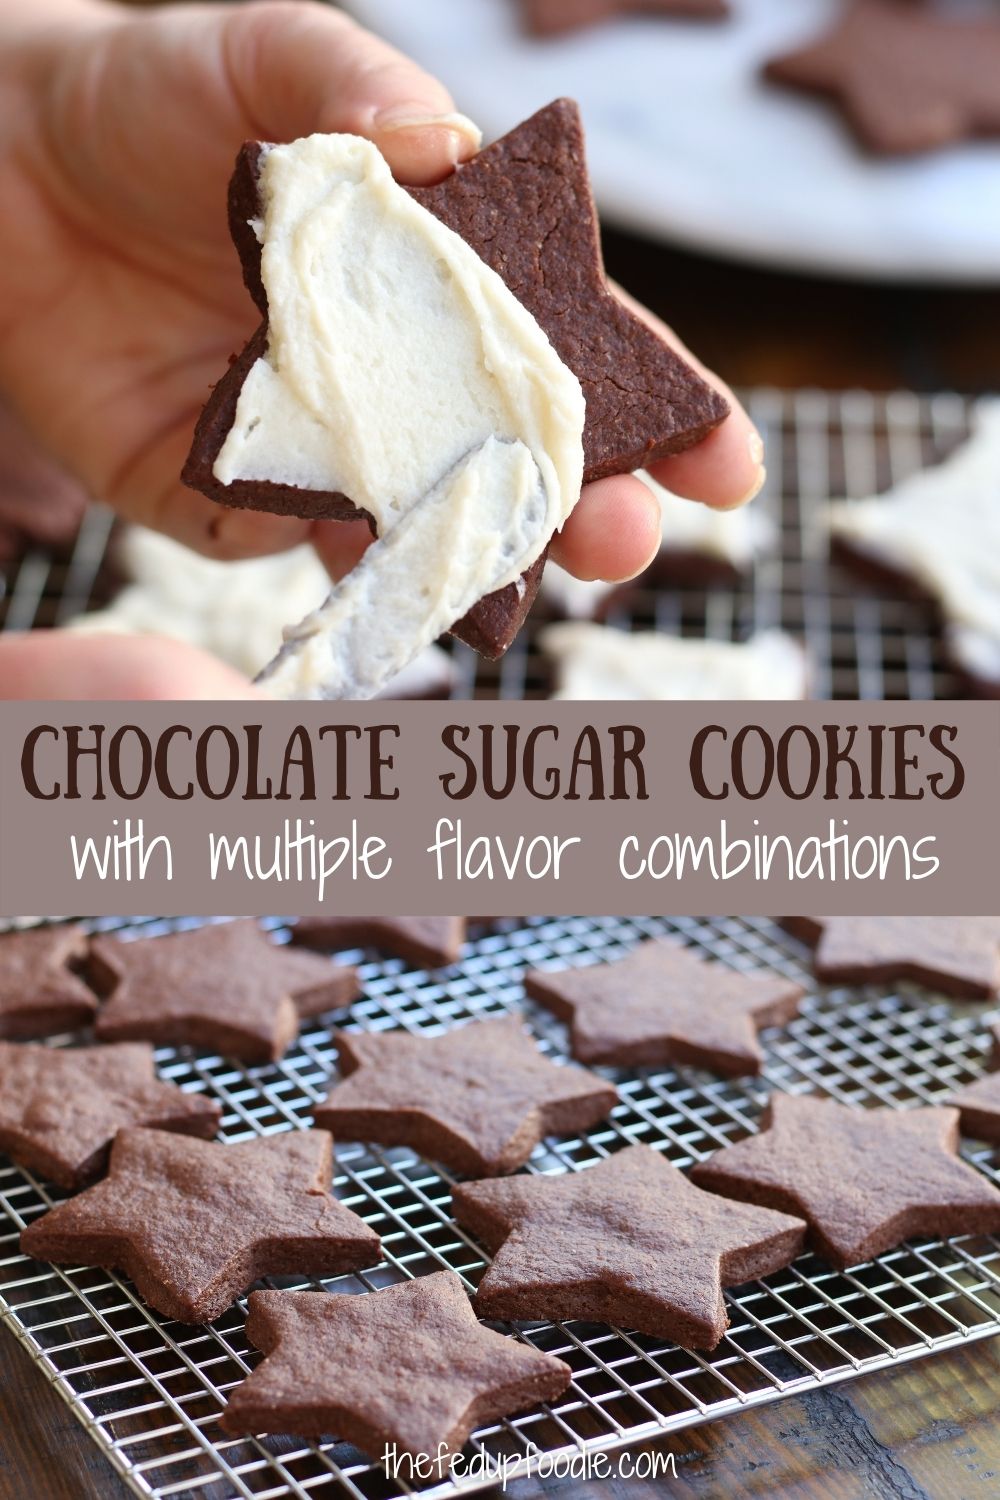 Chocolate Sugar Cookies are fudgy and buttery with a soft texture and crispy edges. These cookies are perfect for Christmas and work great for many parties and events throughout the year. Top with a simple homemade buttercream for a delicious cut out cookie. 
#ChocolateSugarCookie #ChocolateSugarCookieRecipe #ChocolateSugarCookieCutoutRecipe #ChocolateSugarCookiesCutOut #ChocolateCutOutCookies #HomemadeSugarCookies